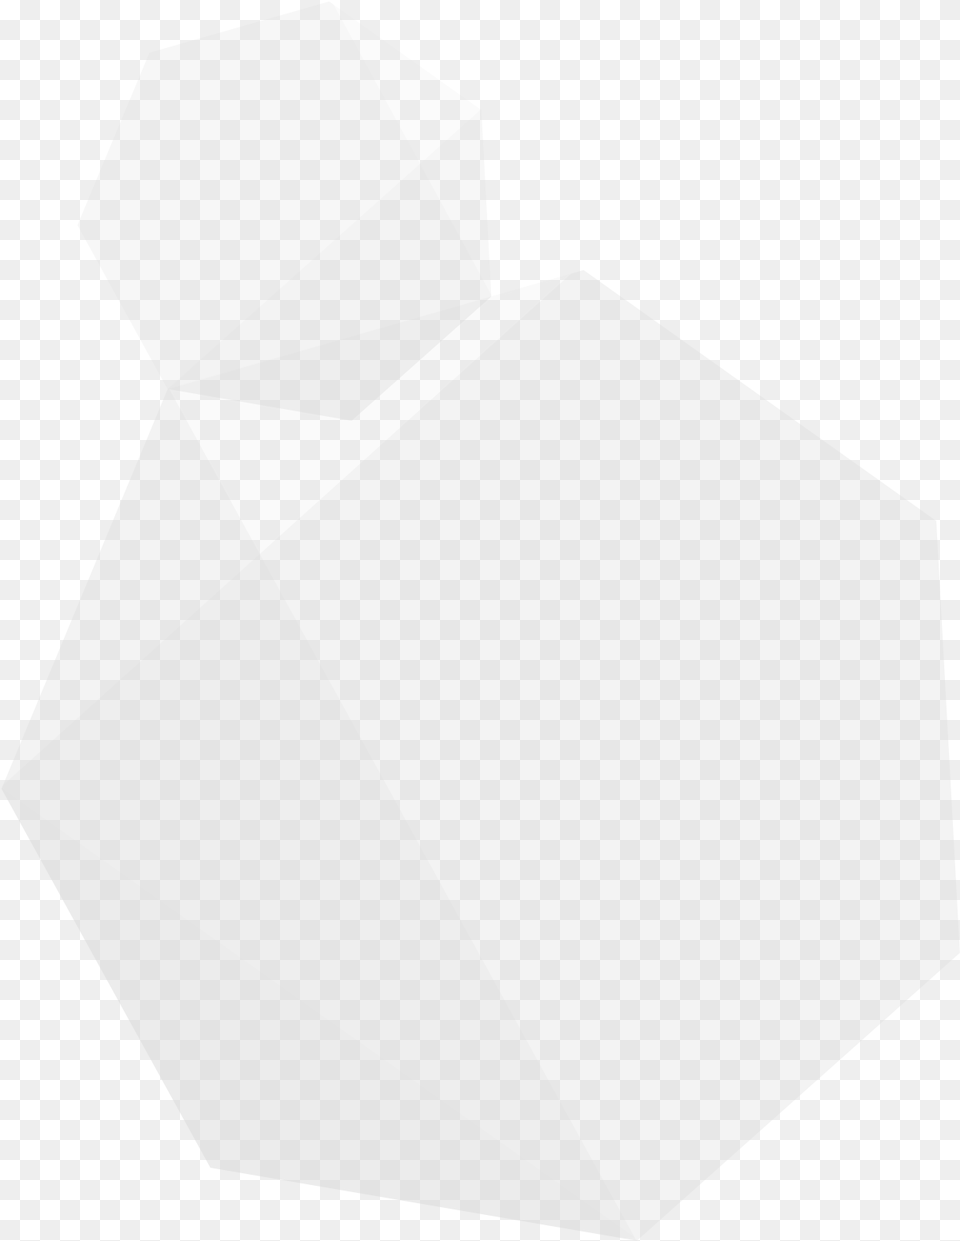 Button Cancel Triangle, Paper, Mineral Png Image